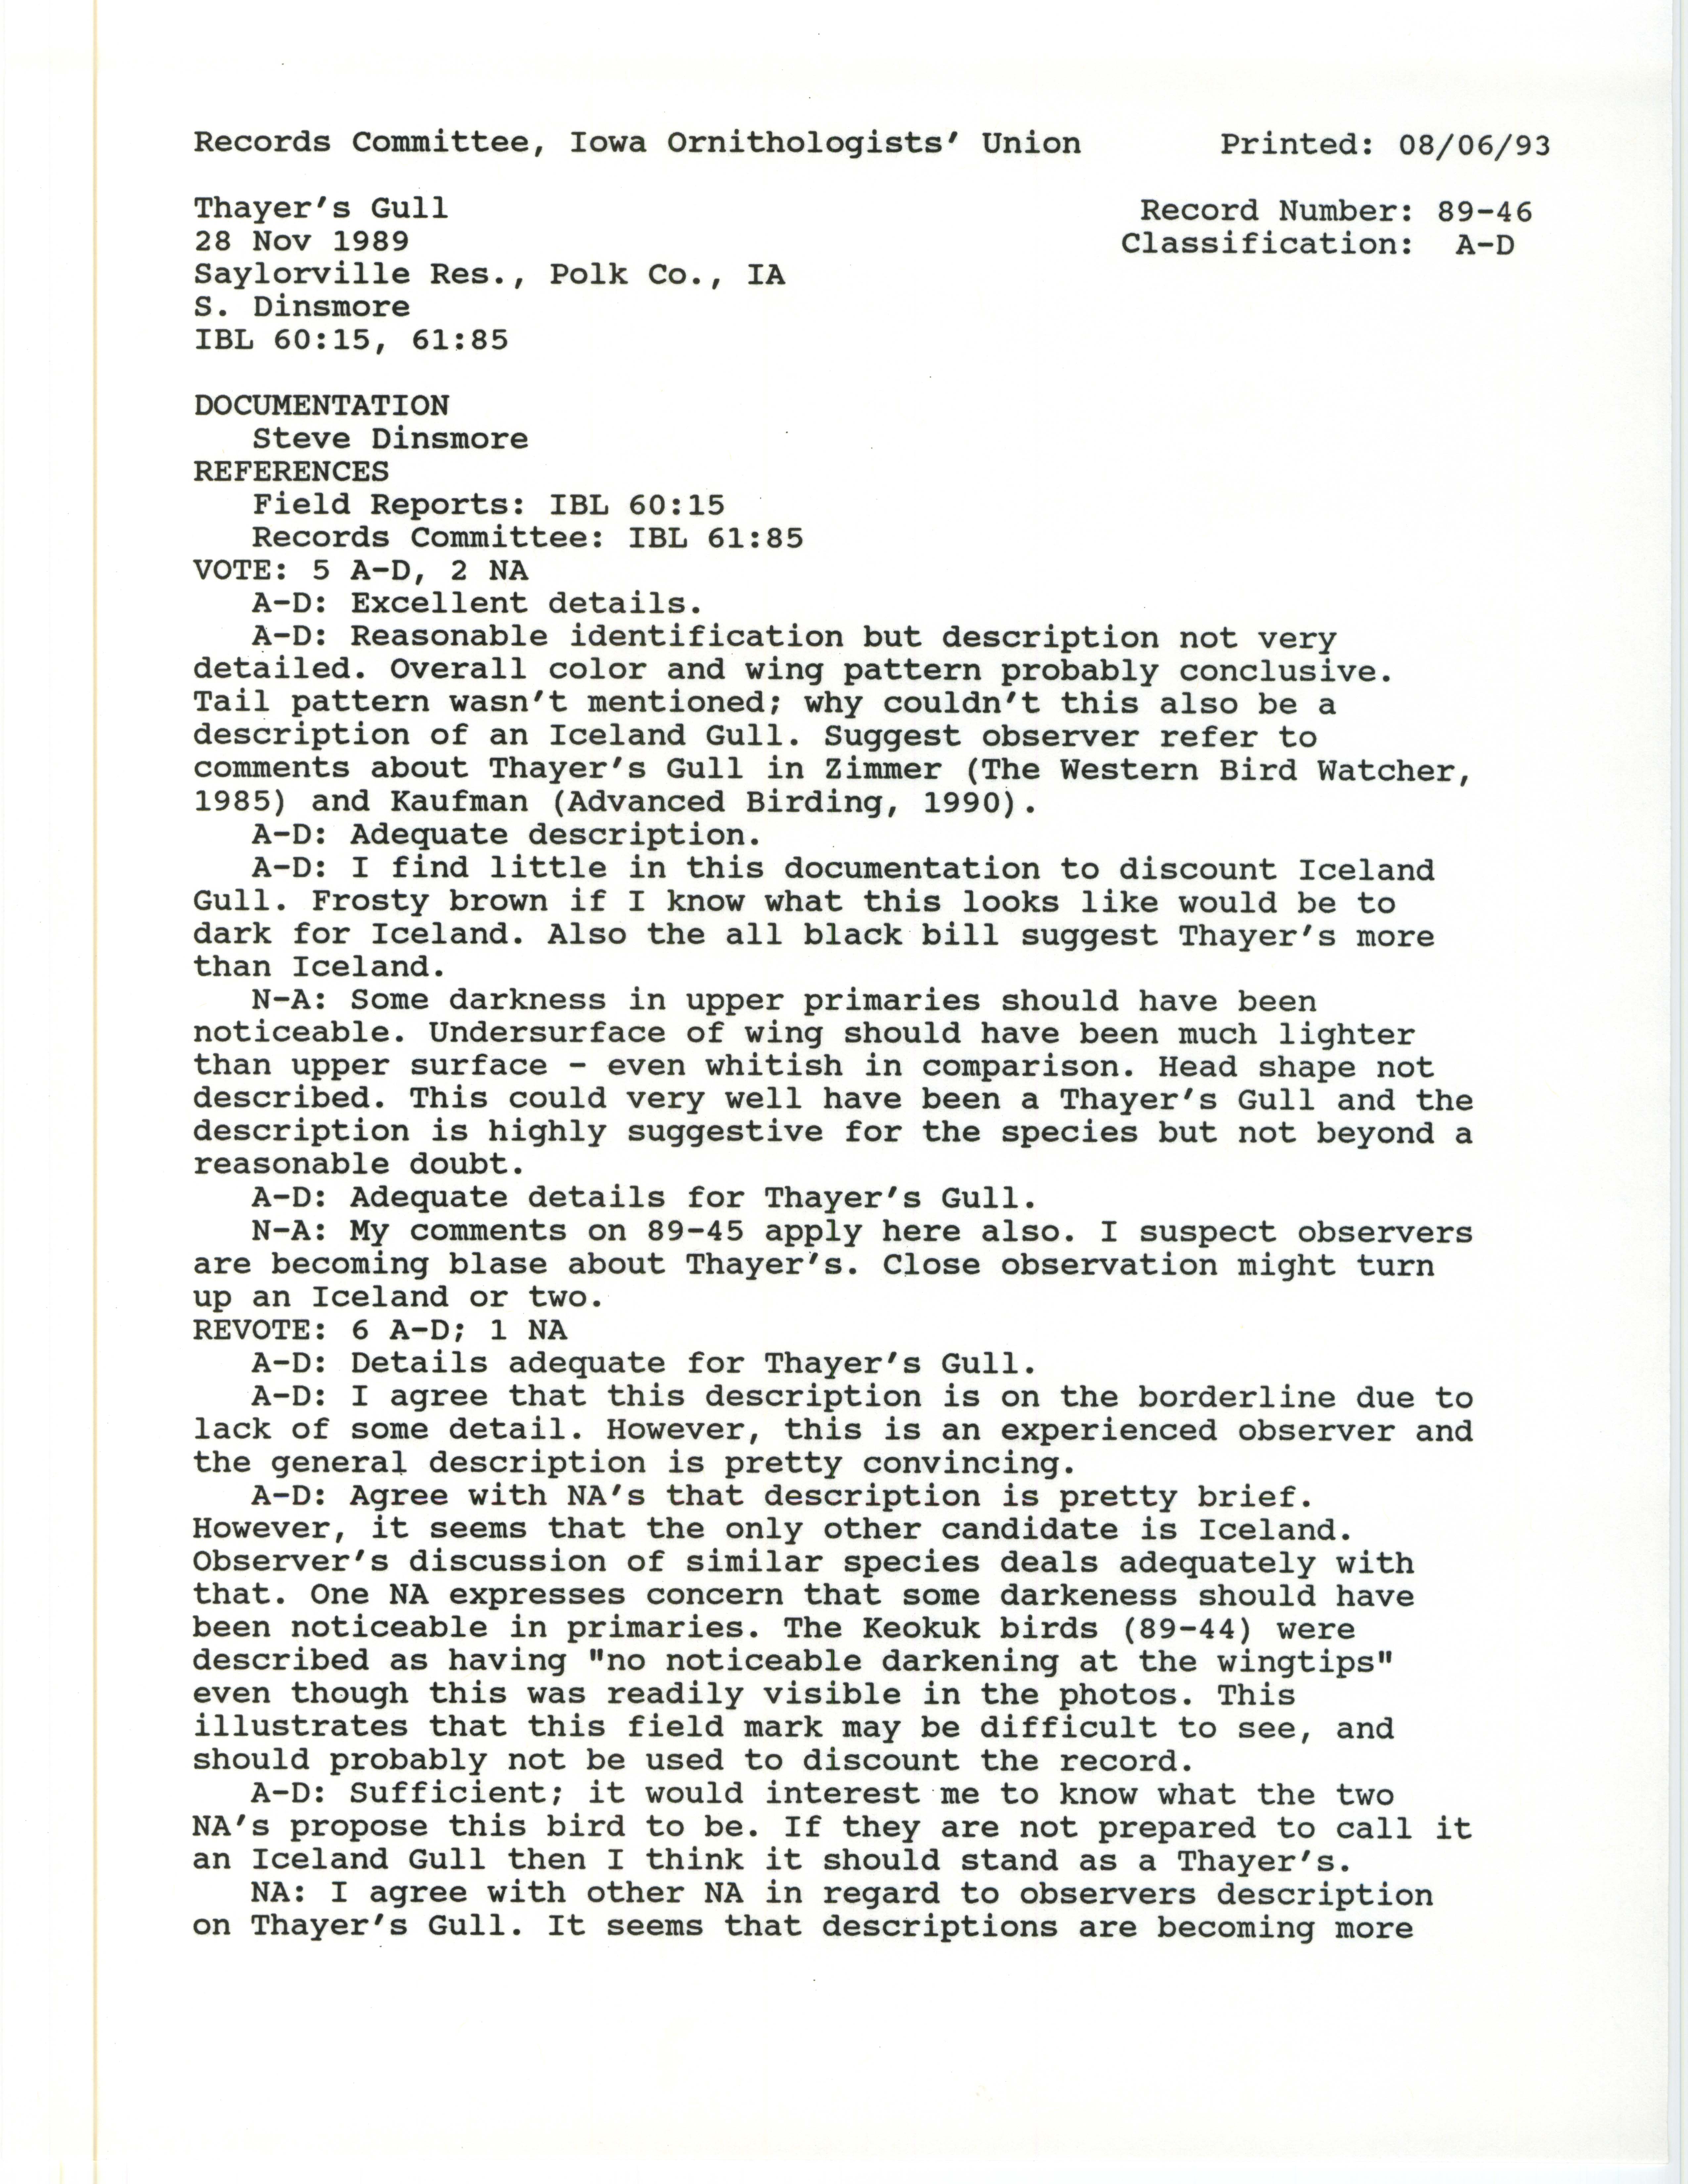 Records Committee review for rare bird sighting of Thayer's Gull at Saylorville Dam, 1989